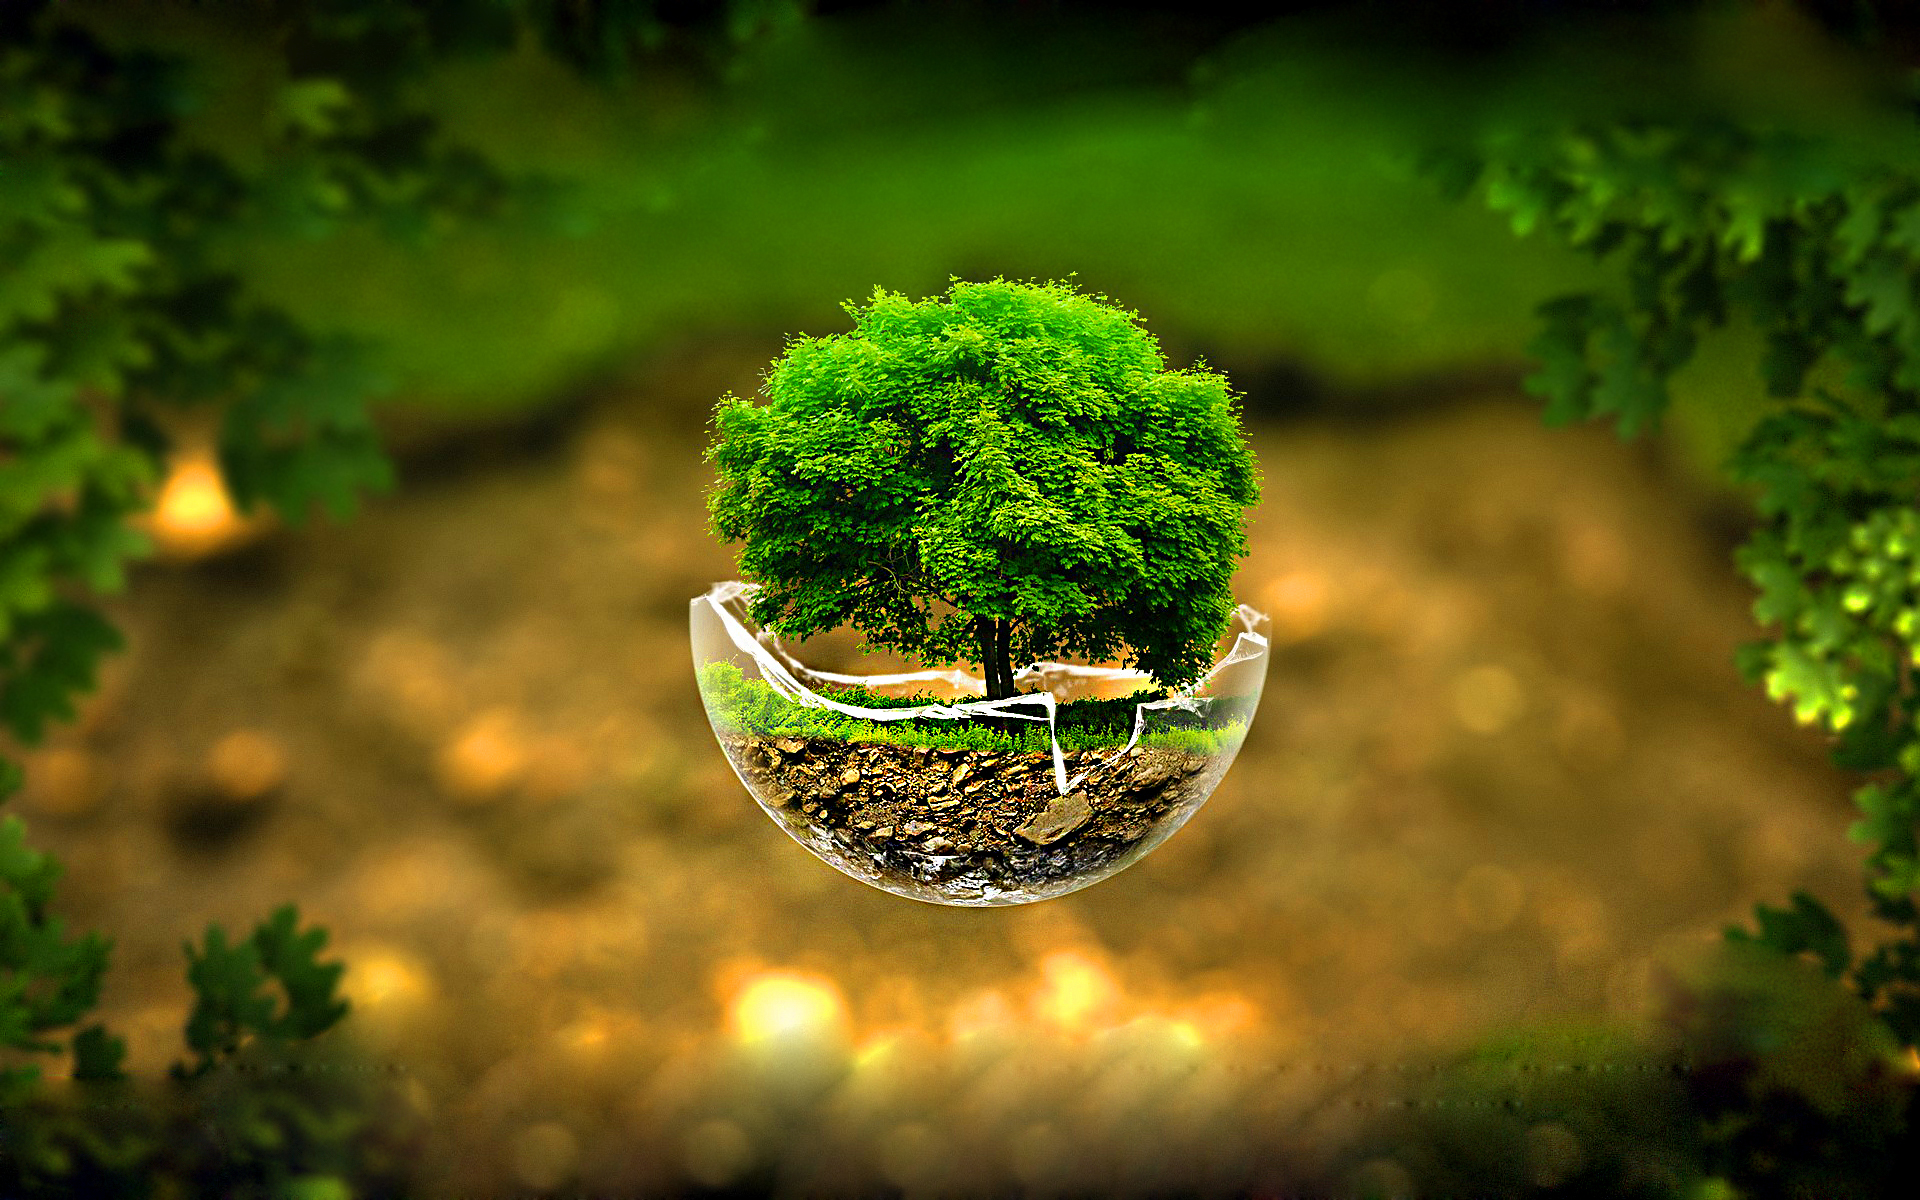 3D Nature Images HD with Flying Tree on Broken Glass - HD Wallpapers